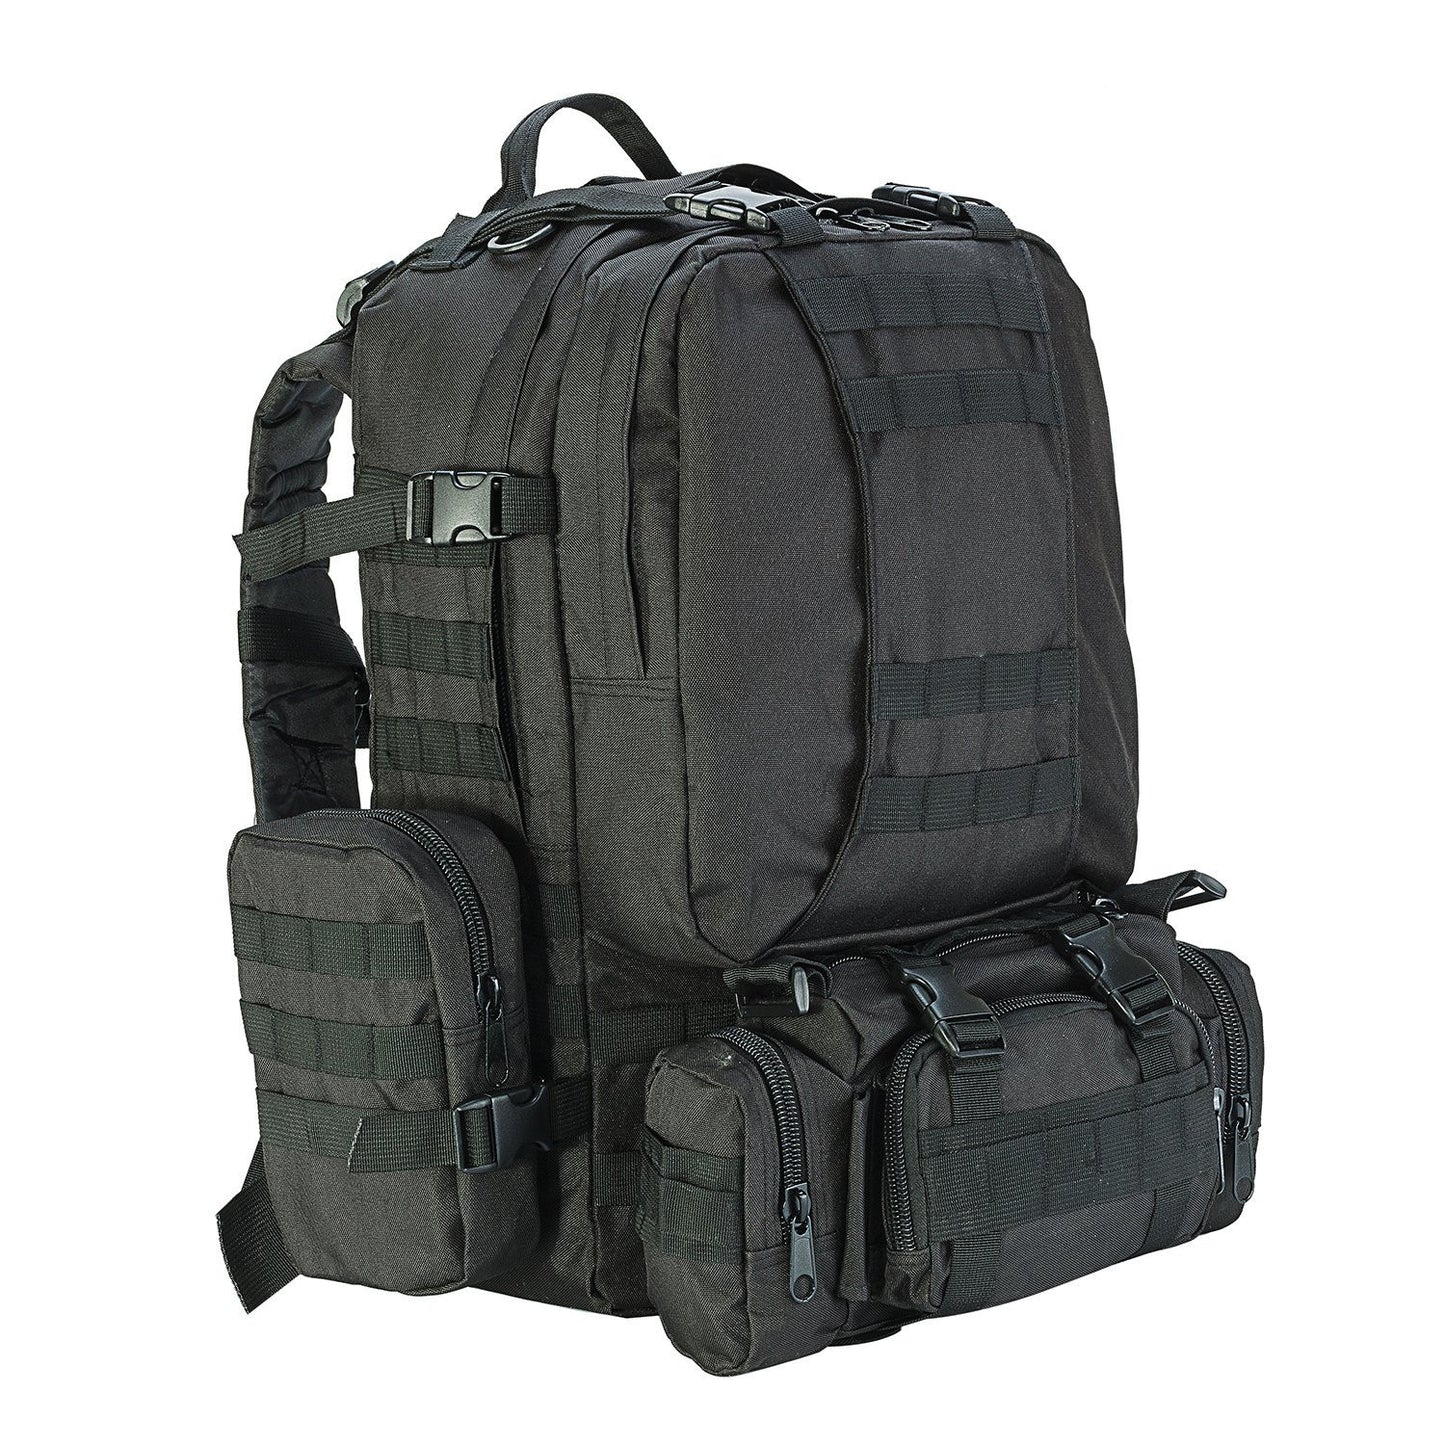 Water Resistant Outdoor 50L Military Backpack